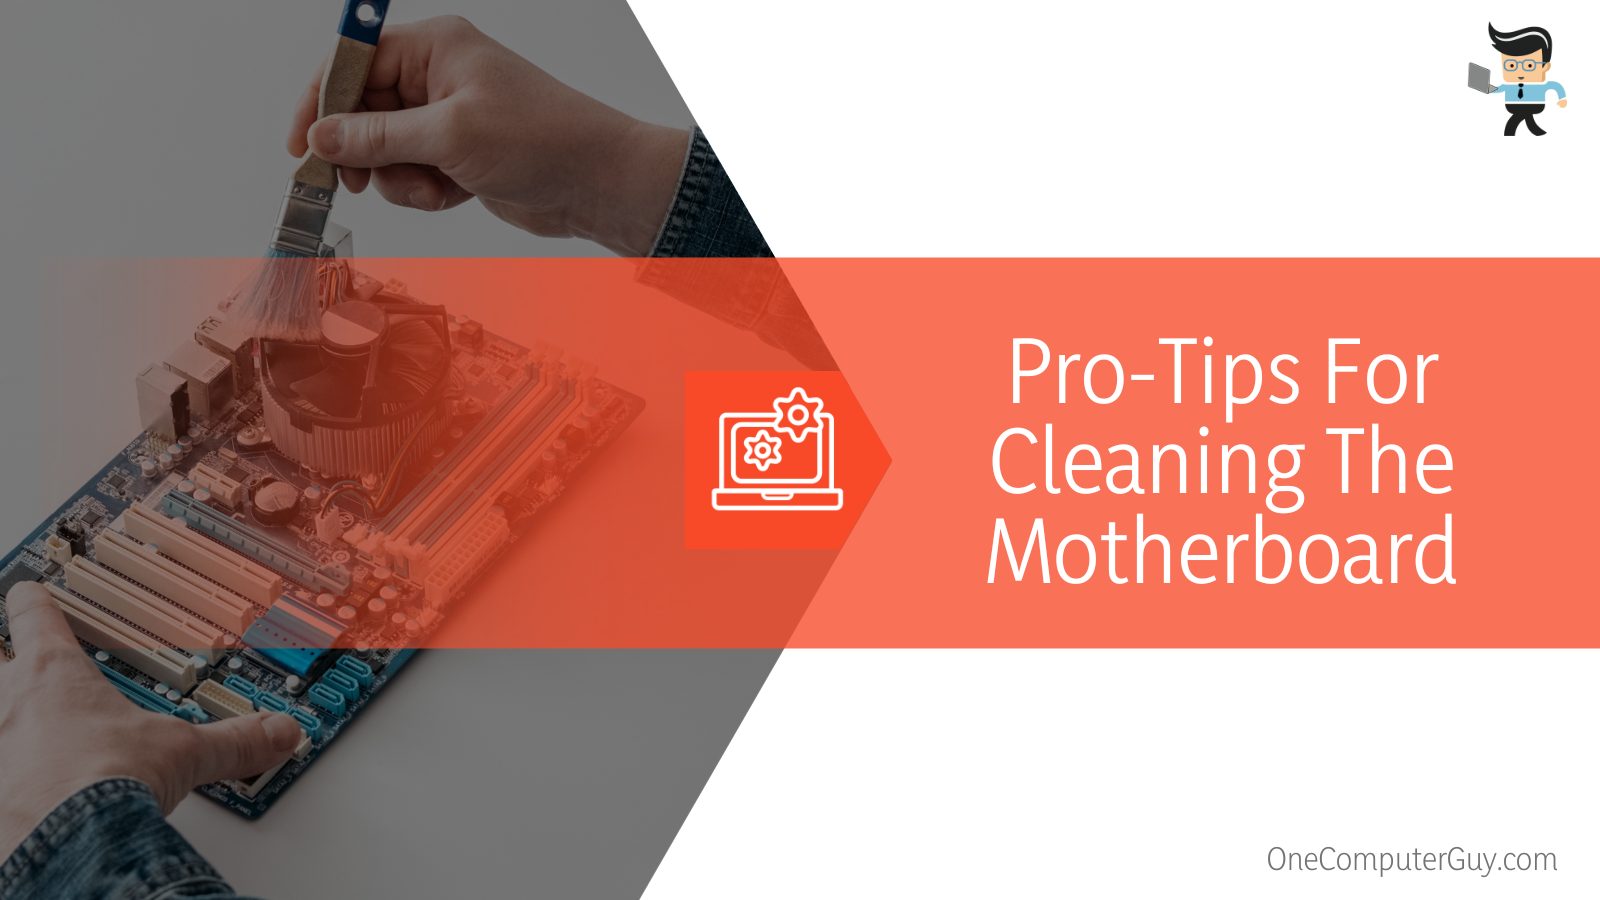 Pro-Tips For Cleaning The Motherboard